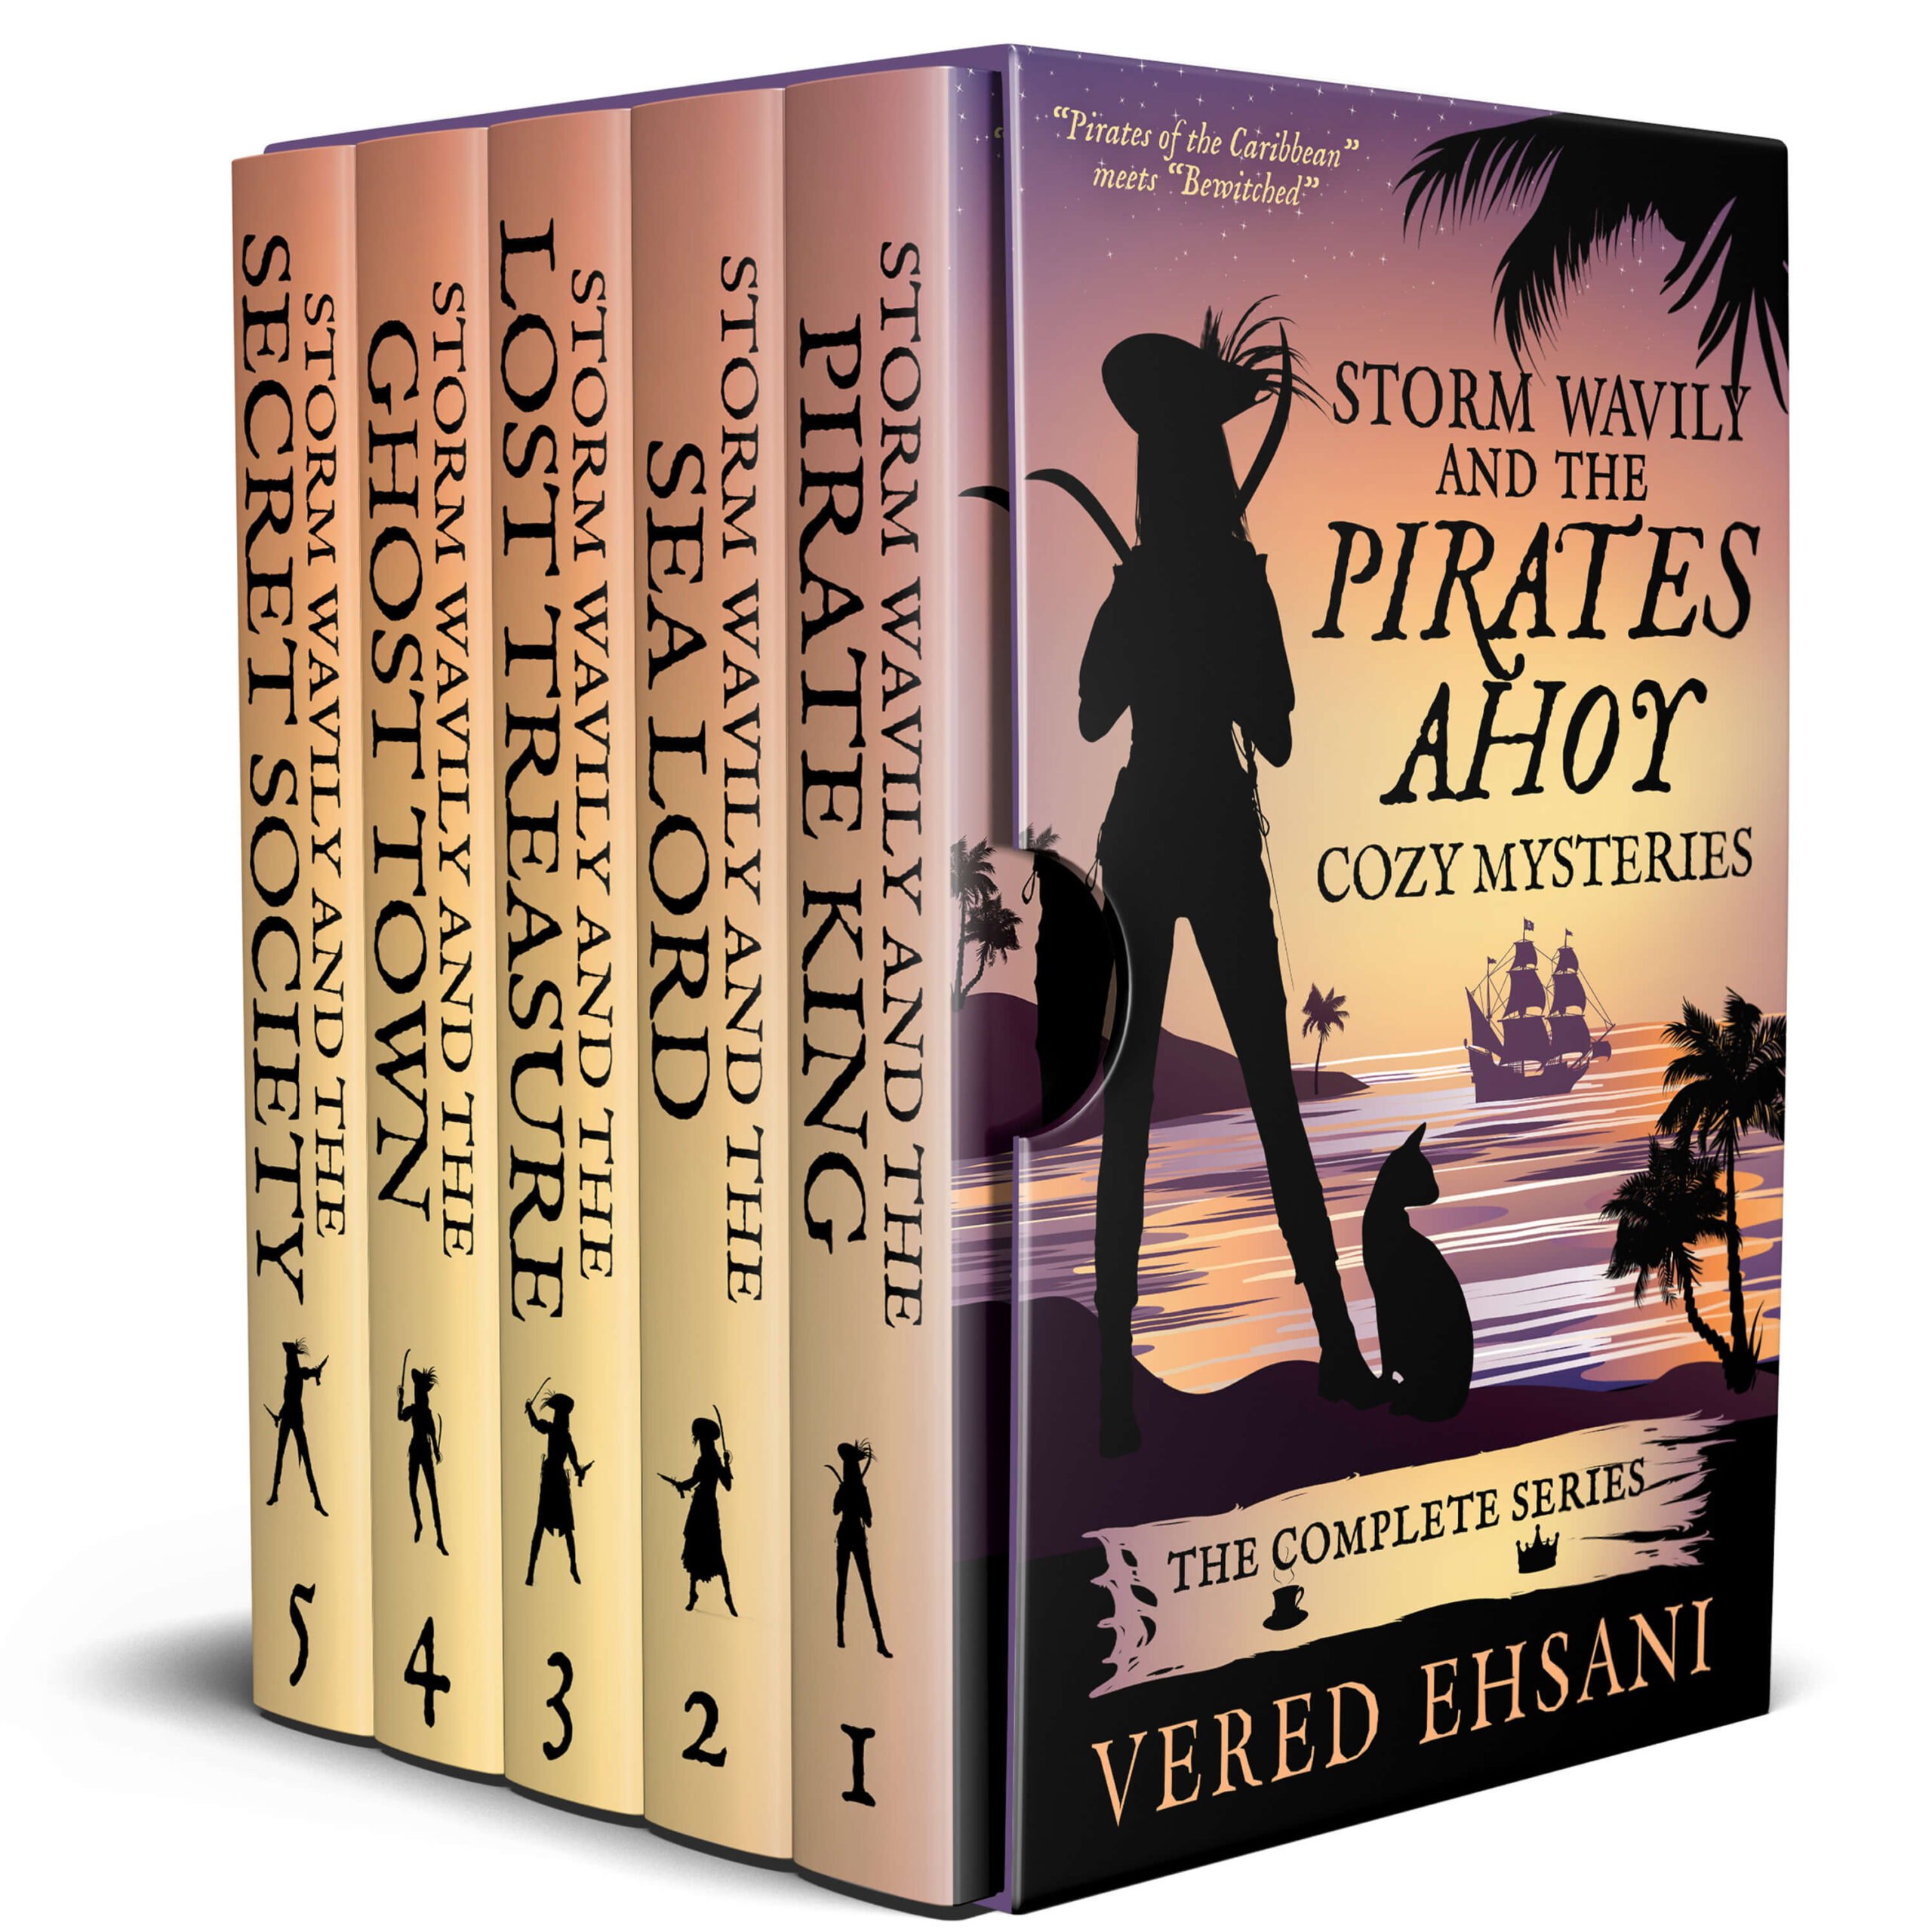 FREE: Storm Wavily and the Pirates Ahoy Cozy Mysteries: The Complete Series by Vered Ehsani